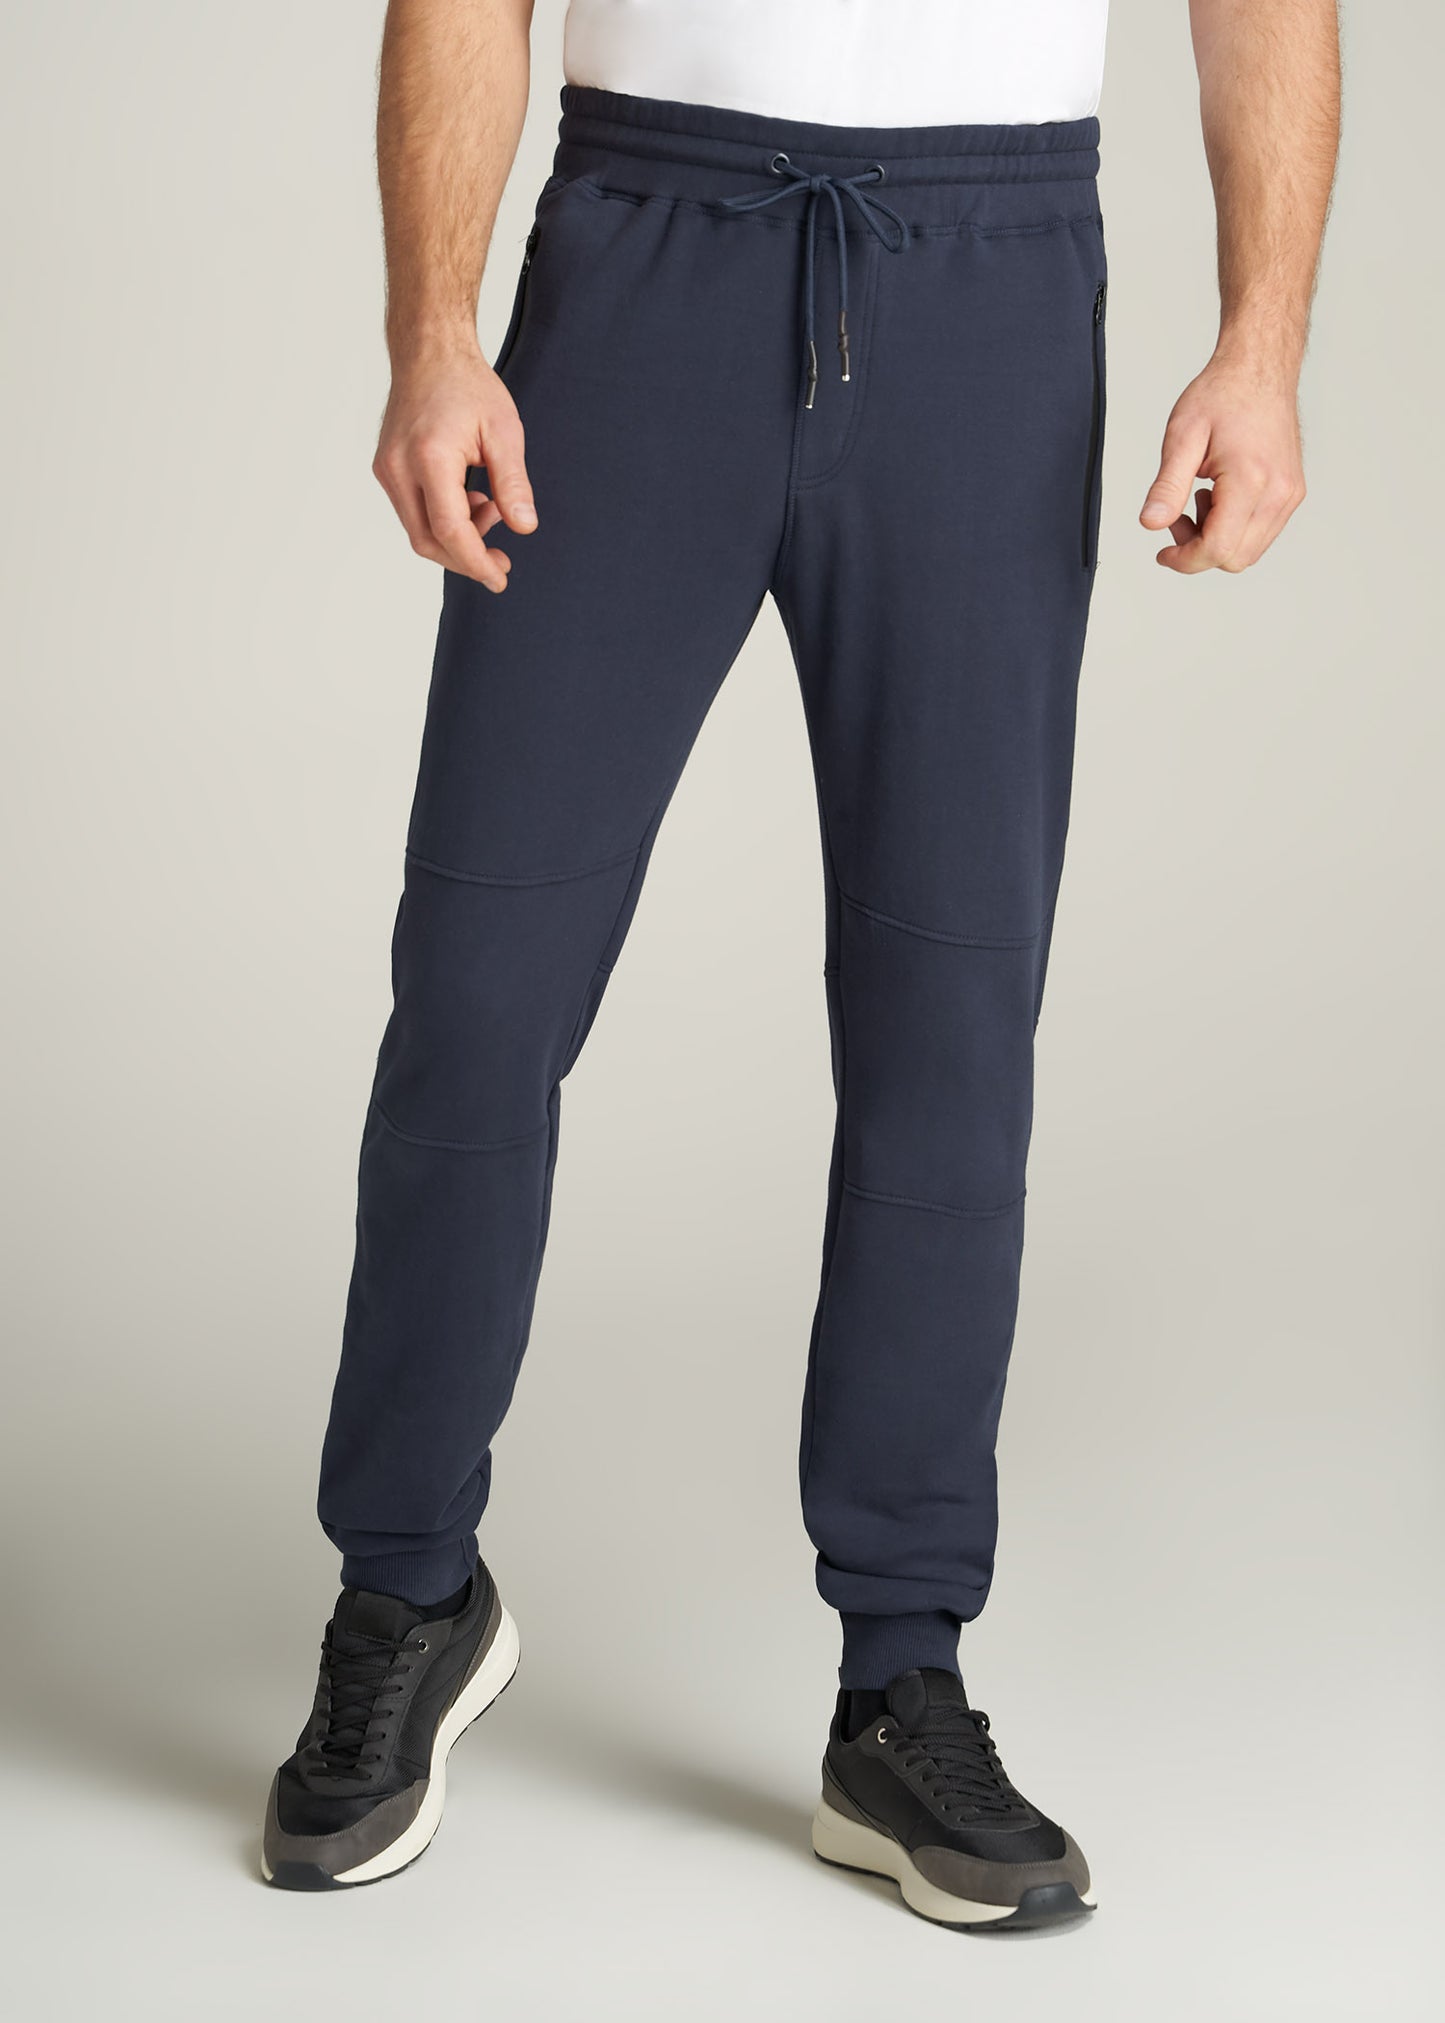 Wearever French Terry Men's Tall Joggers Navy | American Tall